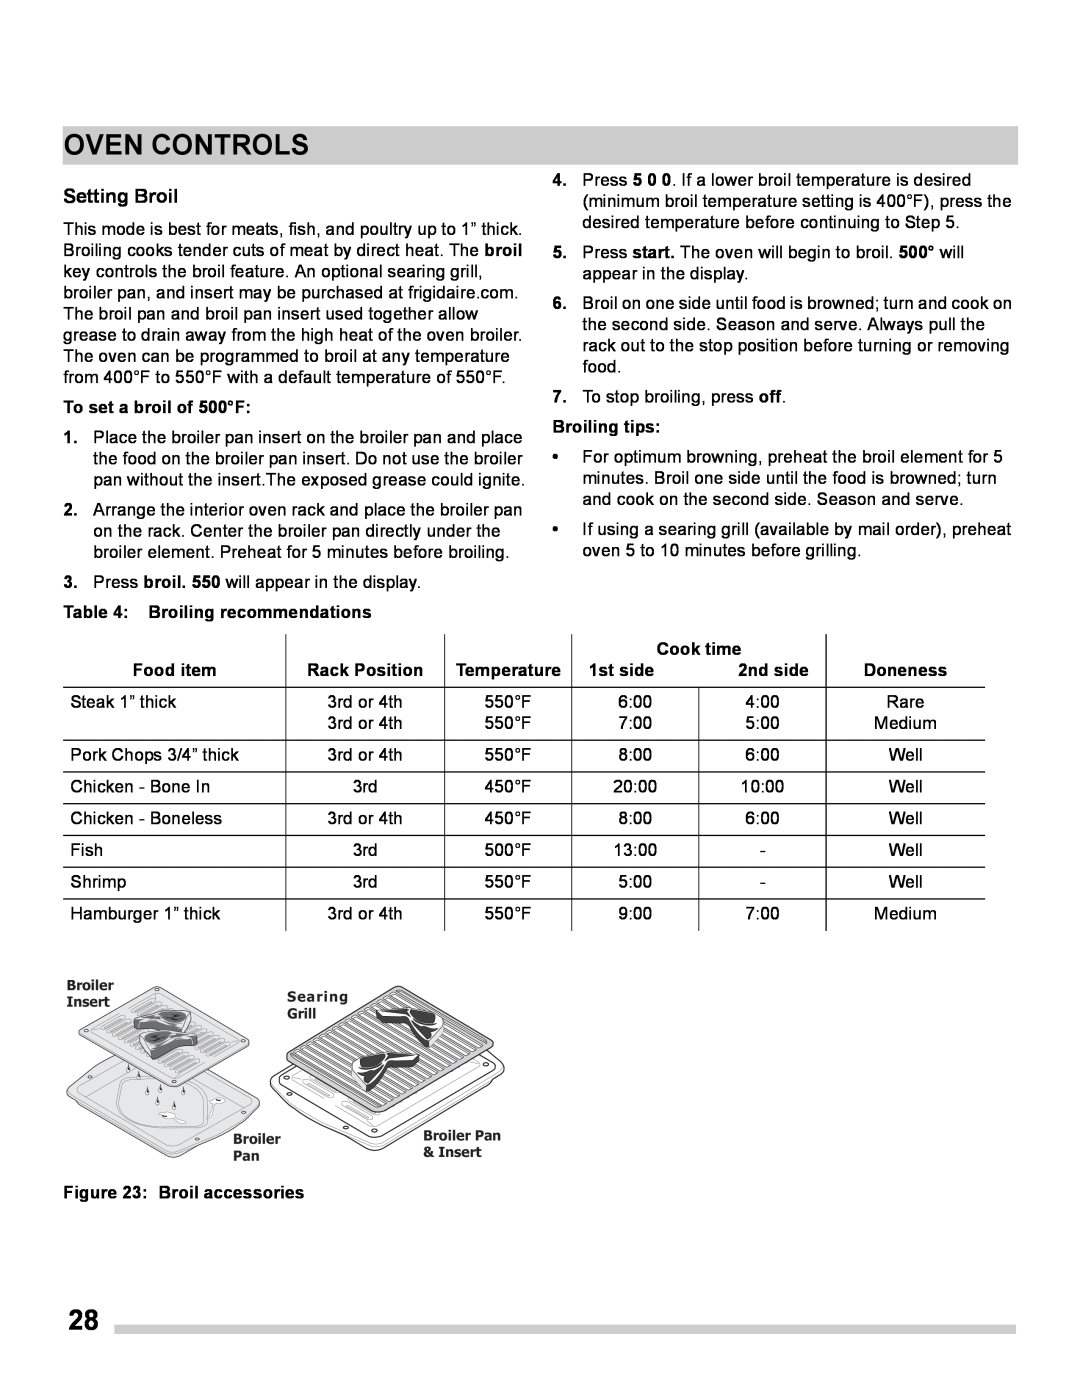 Frigidaire FGES3065PF manual Setting Broil, Oven Controls, To set a broil of 500F, Broiling recommendations, Broiling tips 